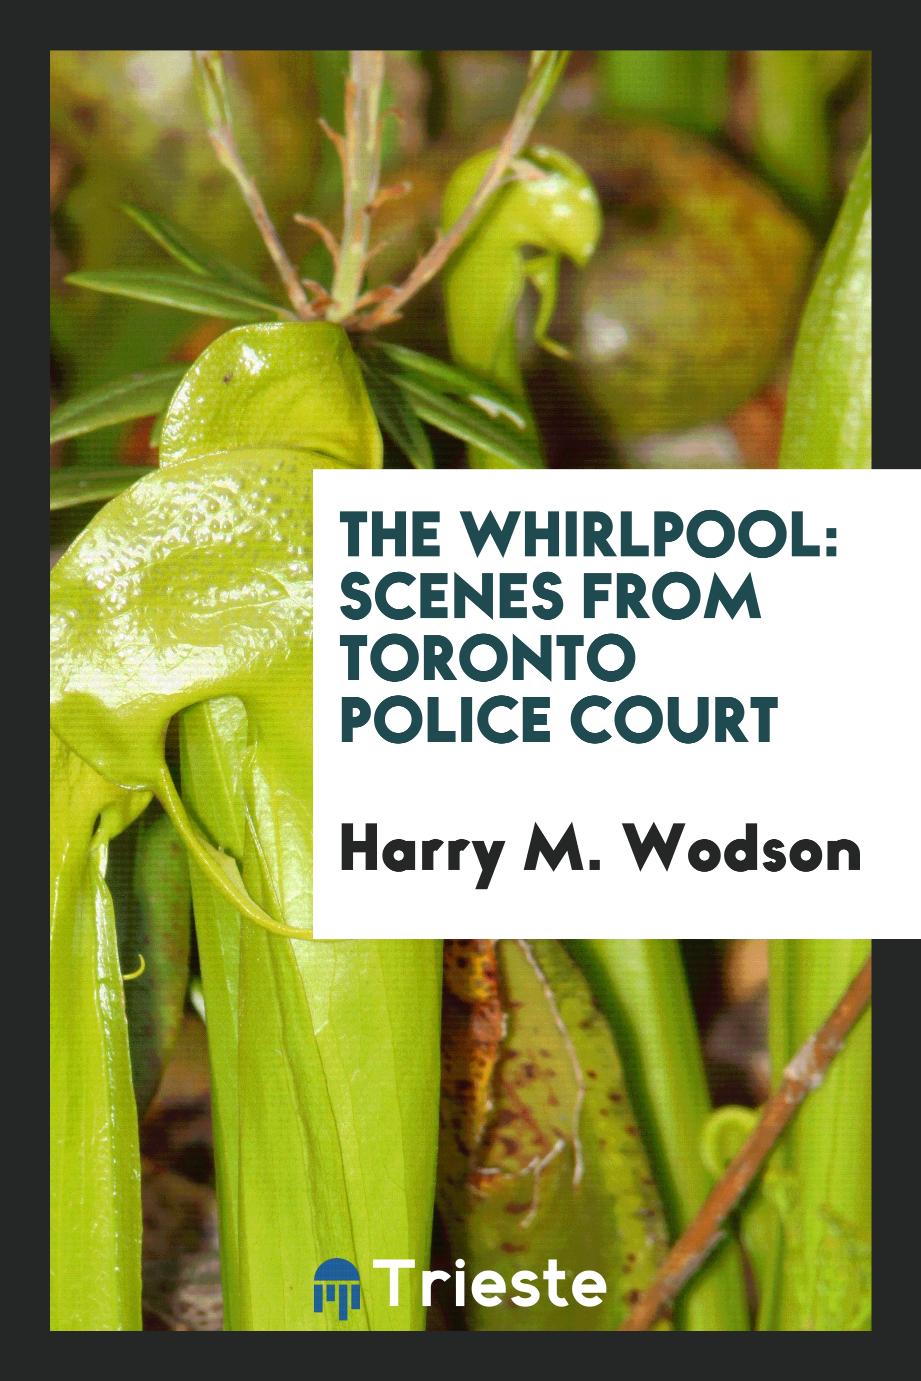 The whirlpool: scenes from Toronto police court